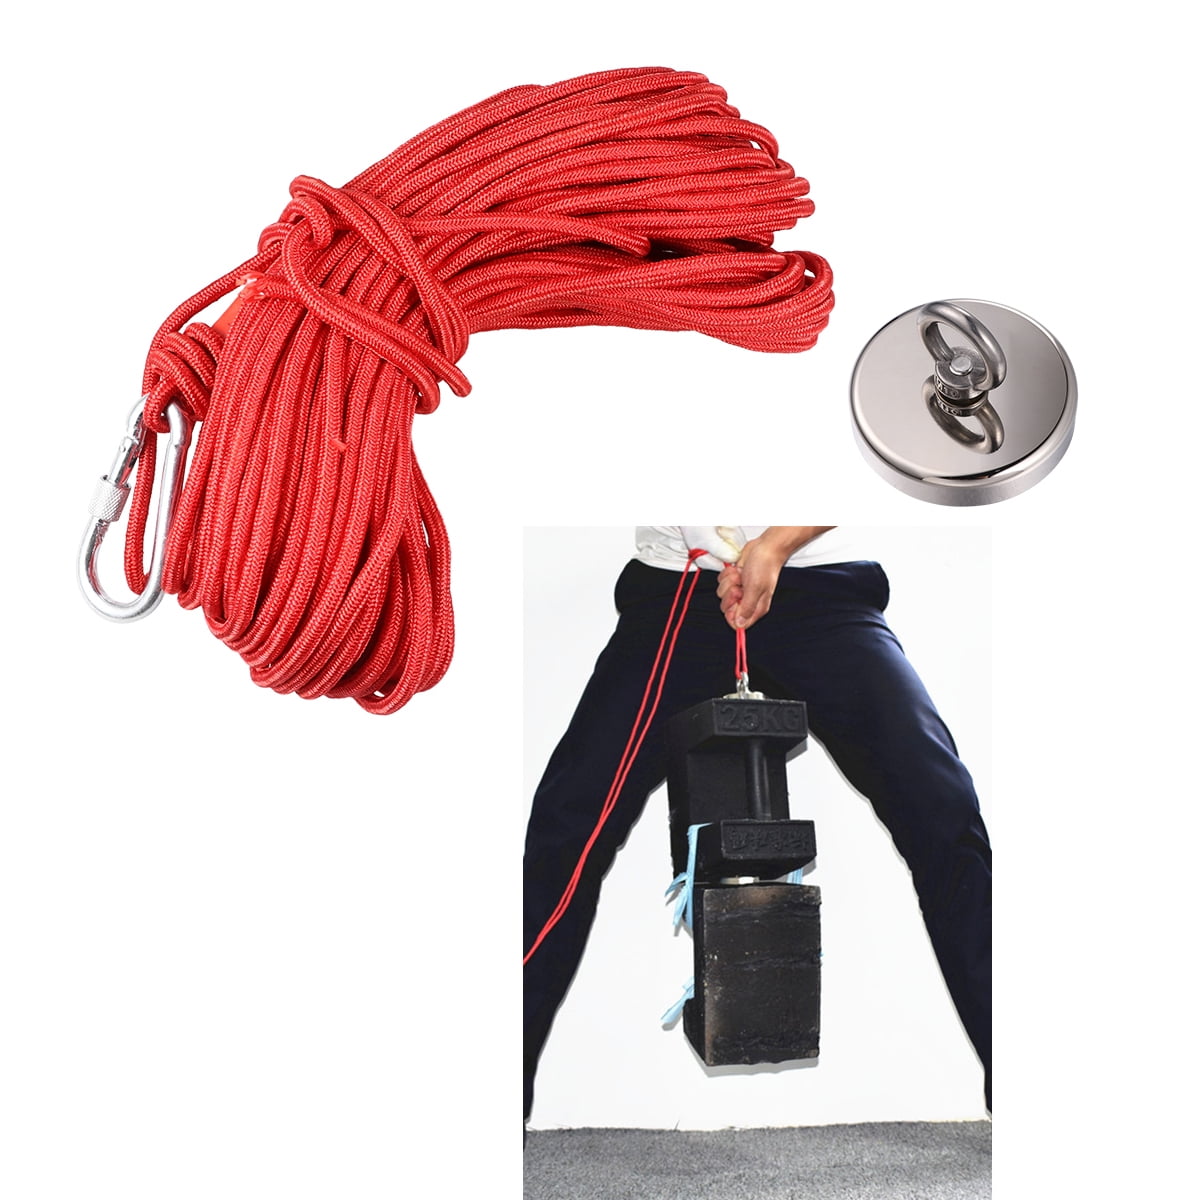 Magnets Fishing with 98Ft(30M) Nylon Rope and Hand Gloves, 924Lbs(400Kg)  Pulling Force Strong Neodymium Magnet for Salvage, Fishing and Retrieving 